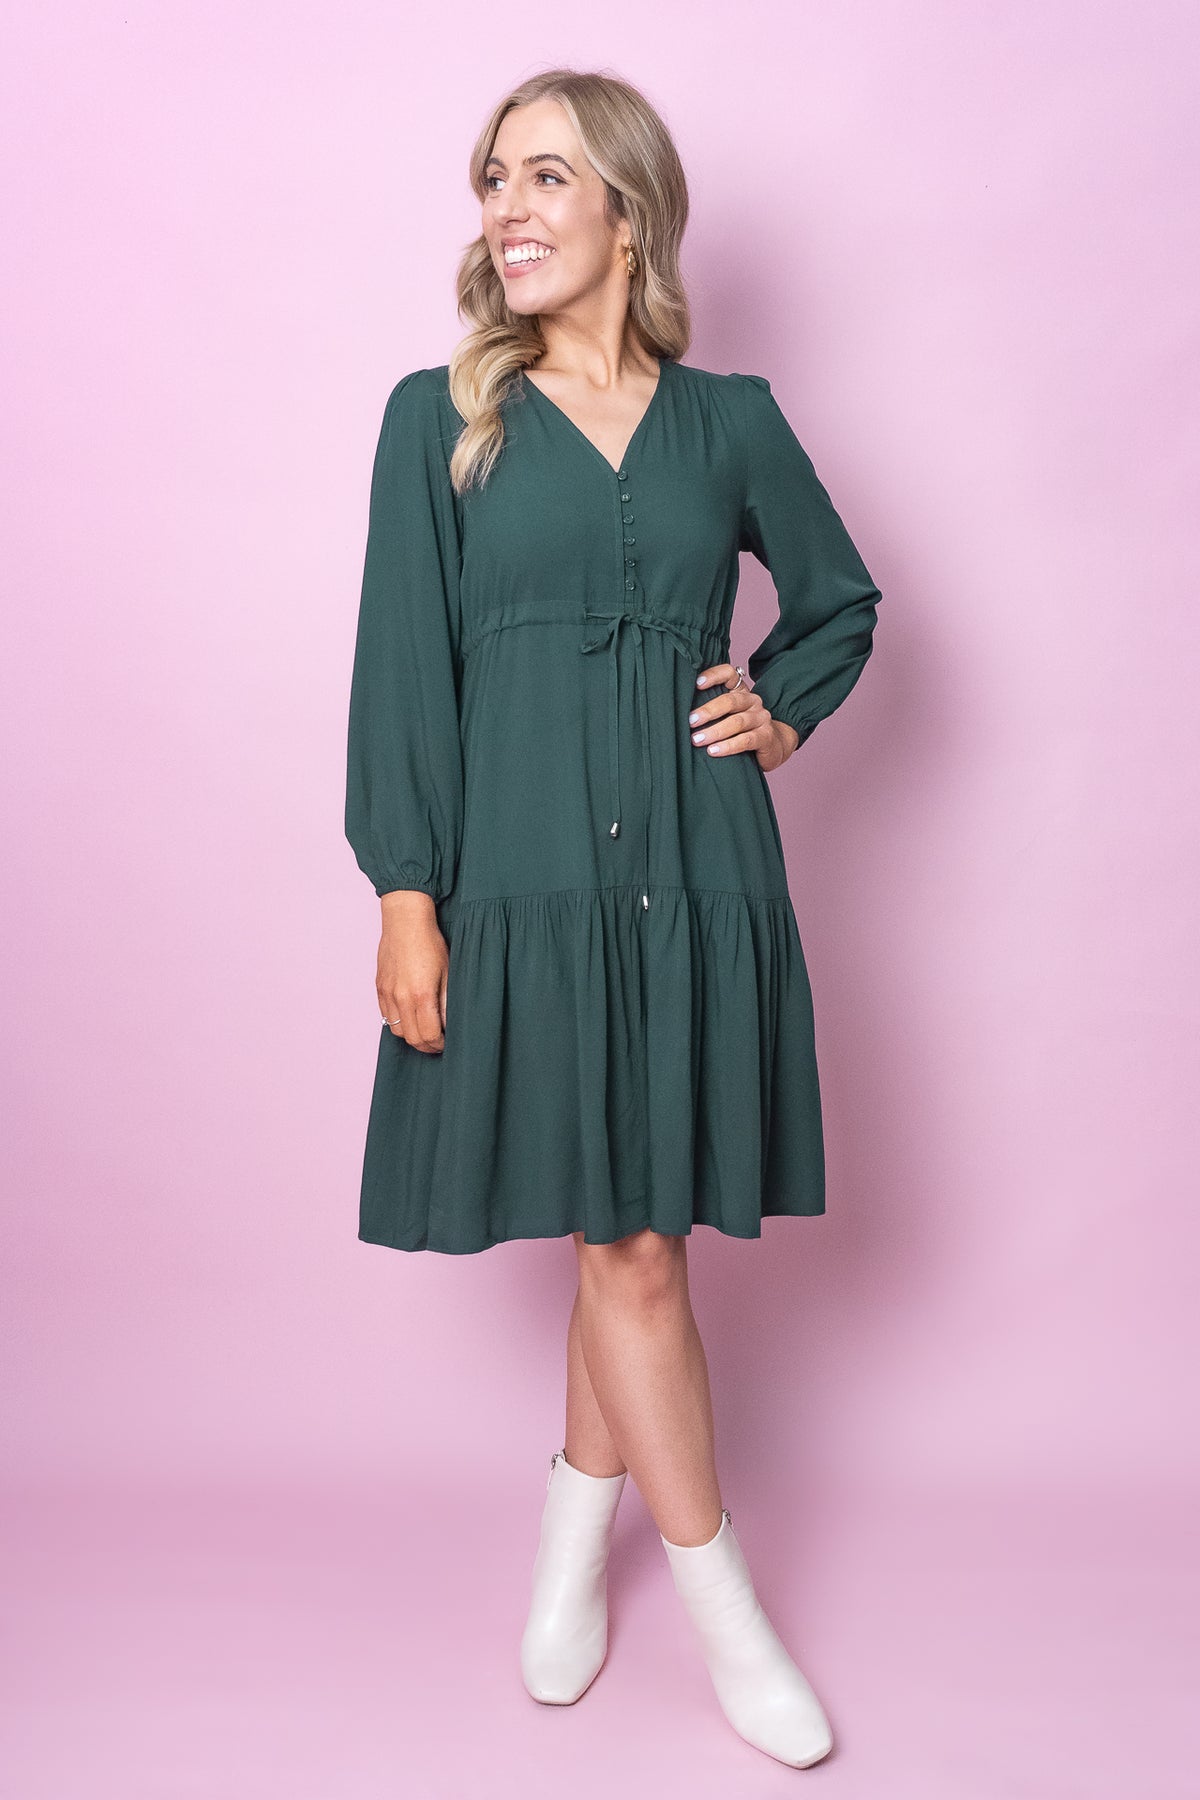 Dixie Dress in Forest Green